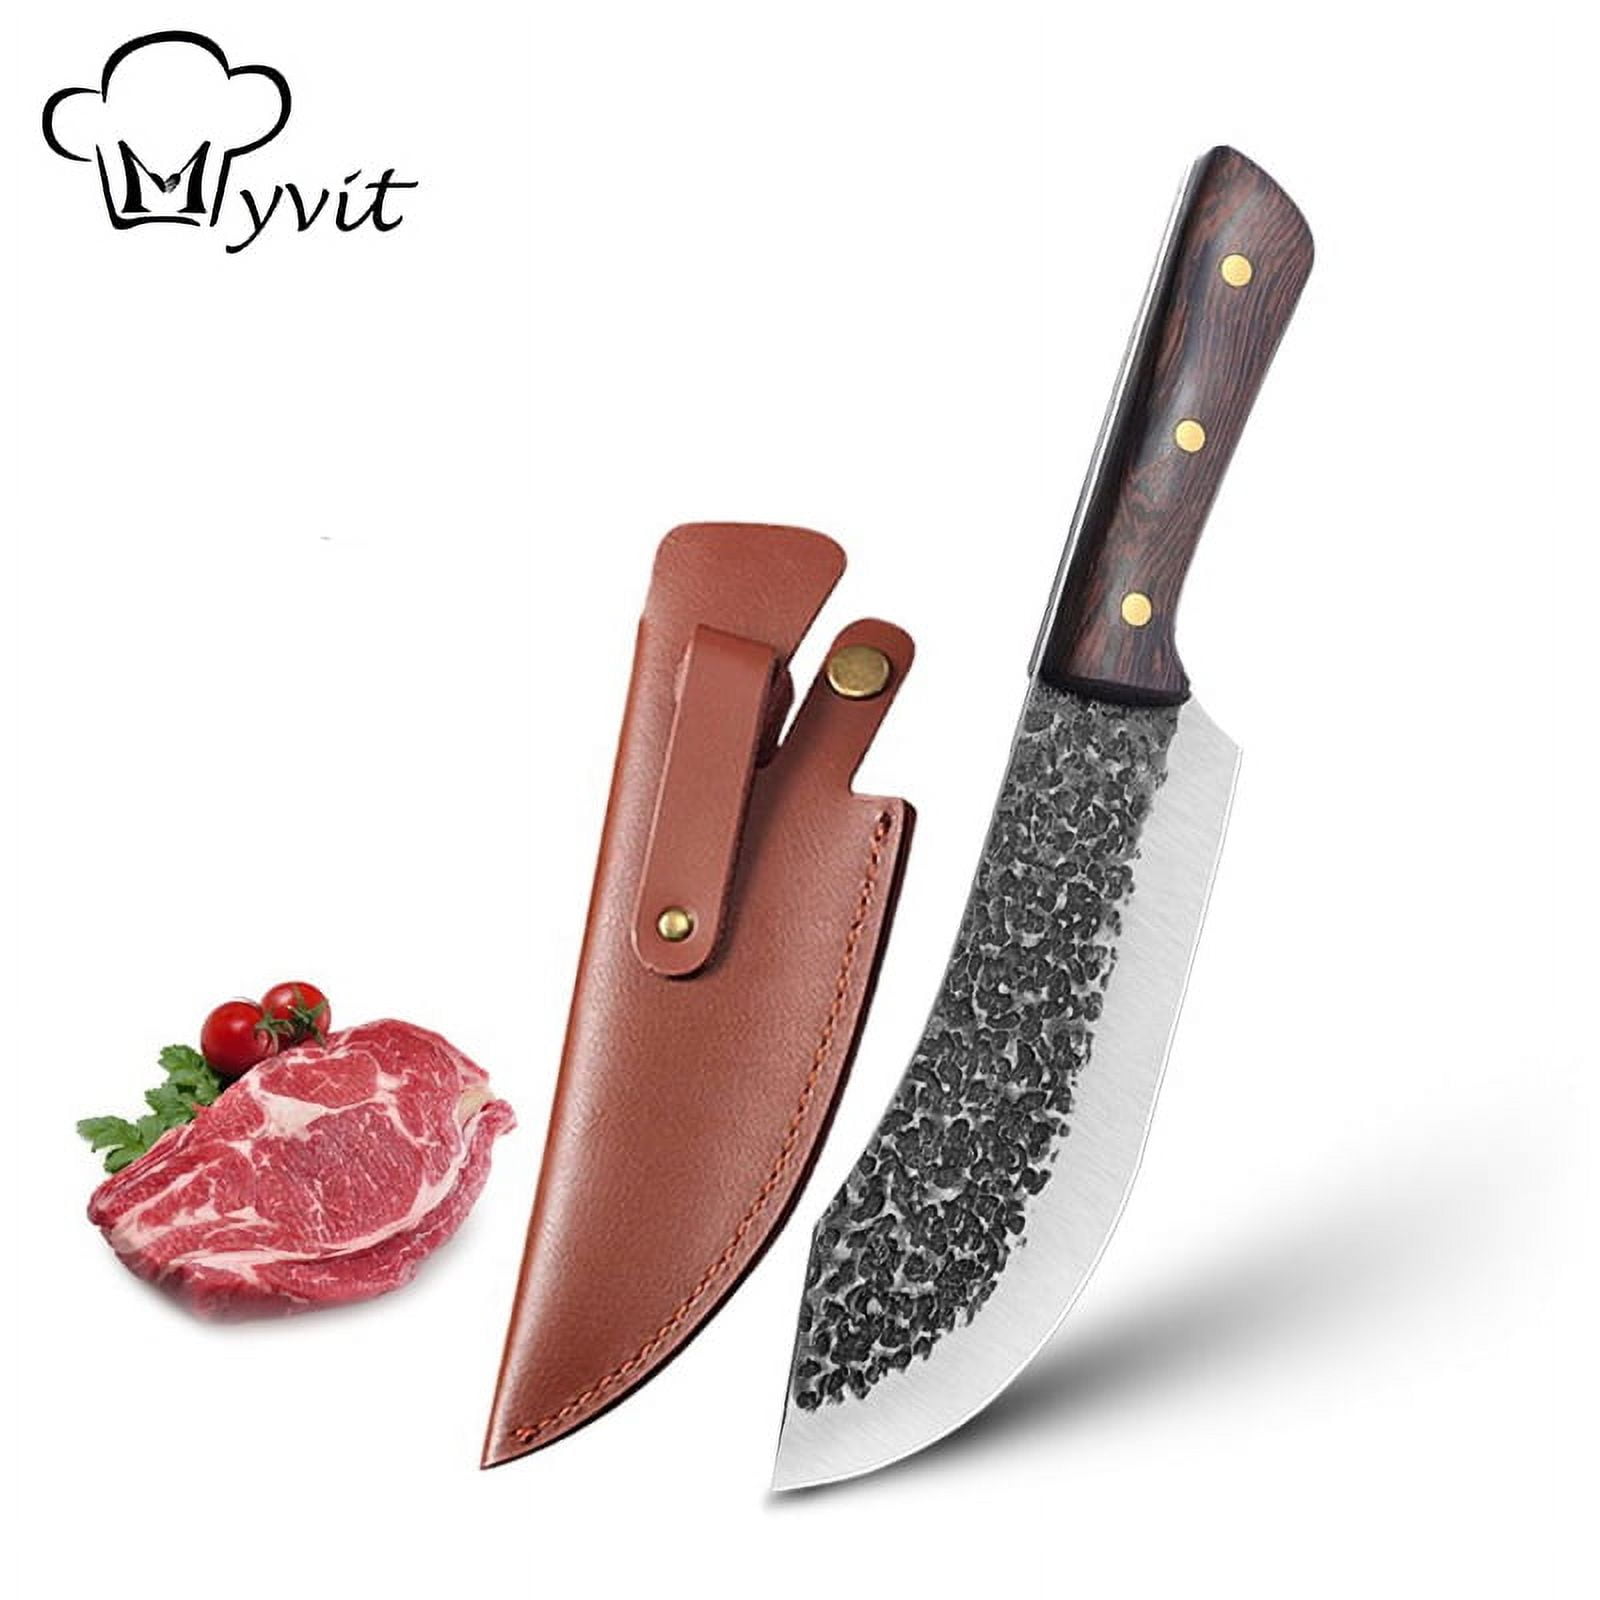 FULLHI 3PCS Butcher Knife Set with Sheath Hand Forged chef knife Boning  Knife, High Carbon Steel Meat Cutting Knife for Kitchen Camping BBQ Cleaver  set 